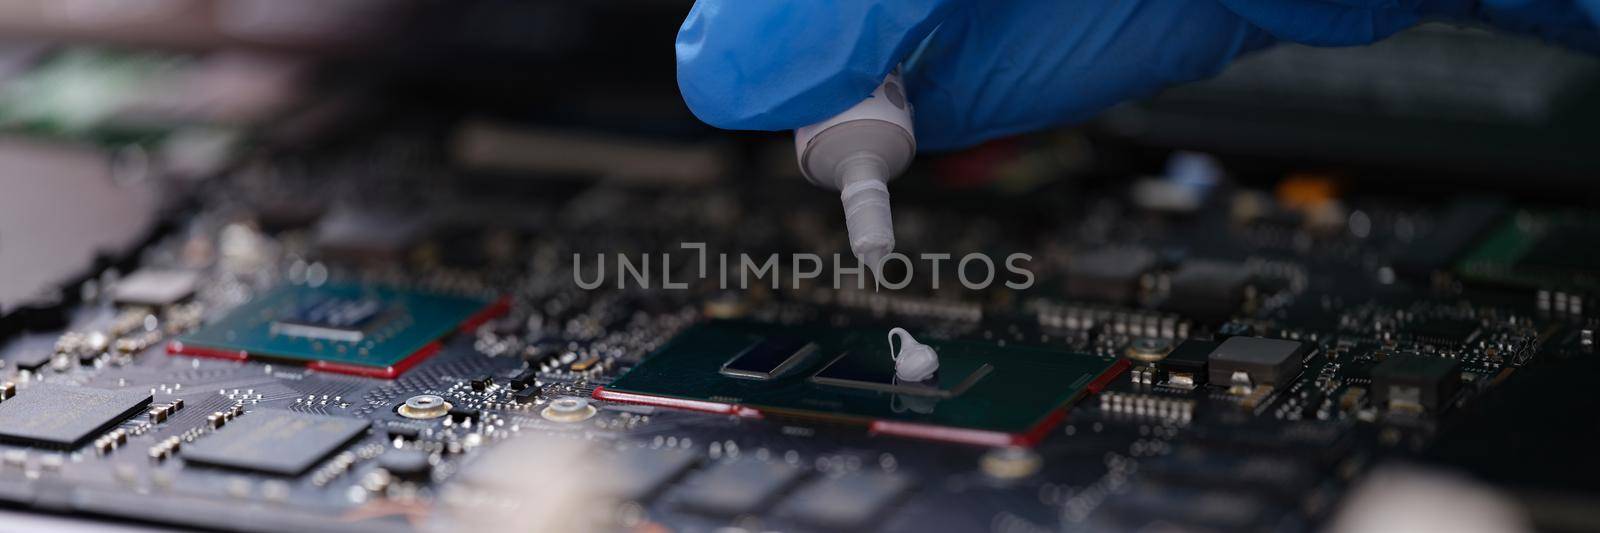 Thermal paste for the processor, computer repair, hands close-up. Workshop for servicing electronic devices, part of a laptop